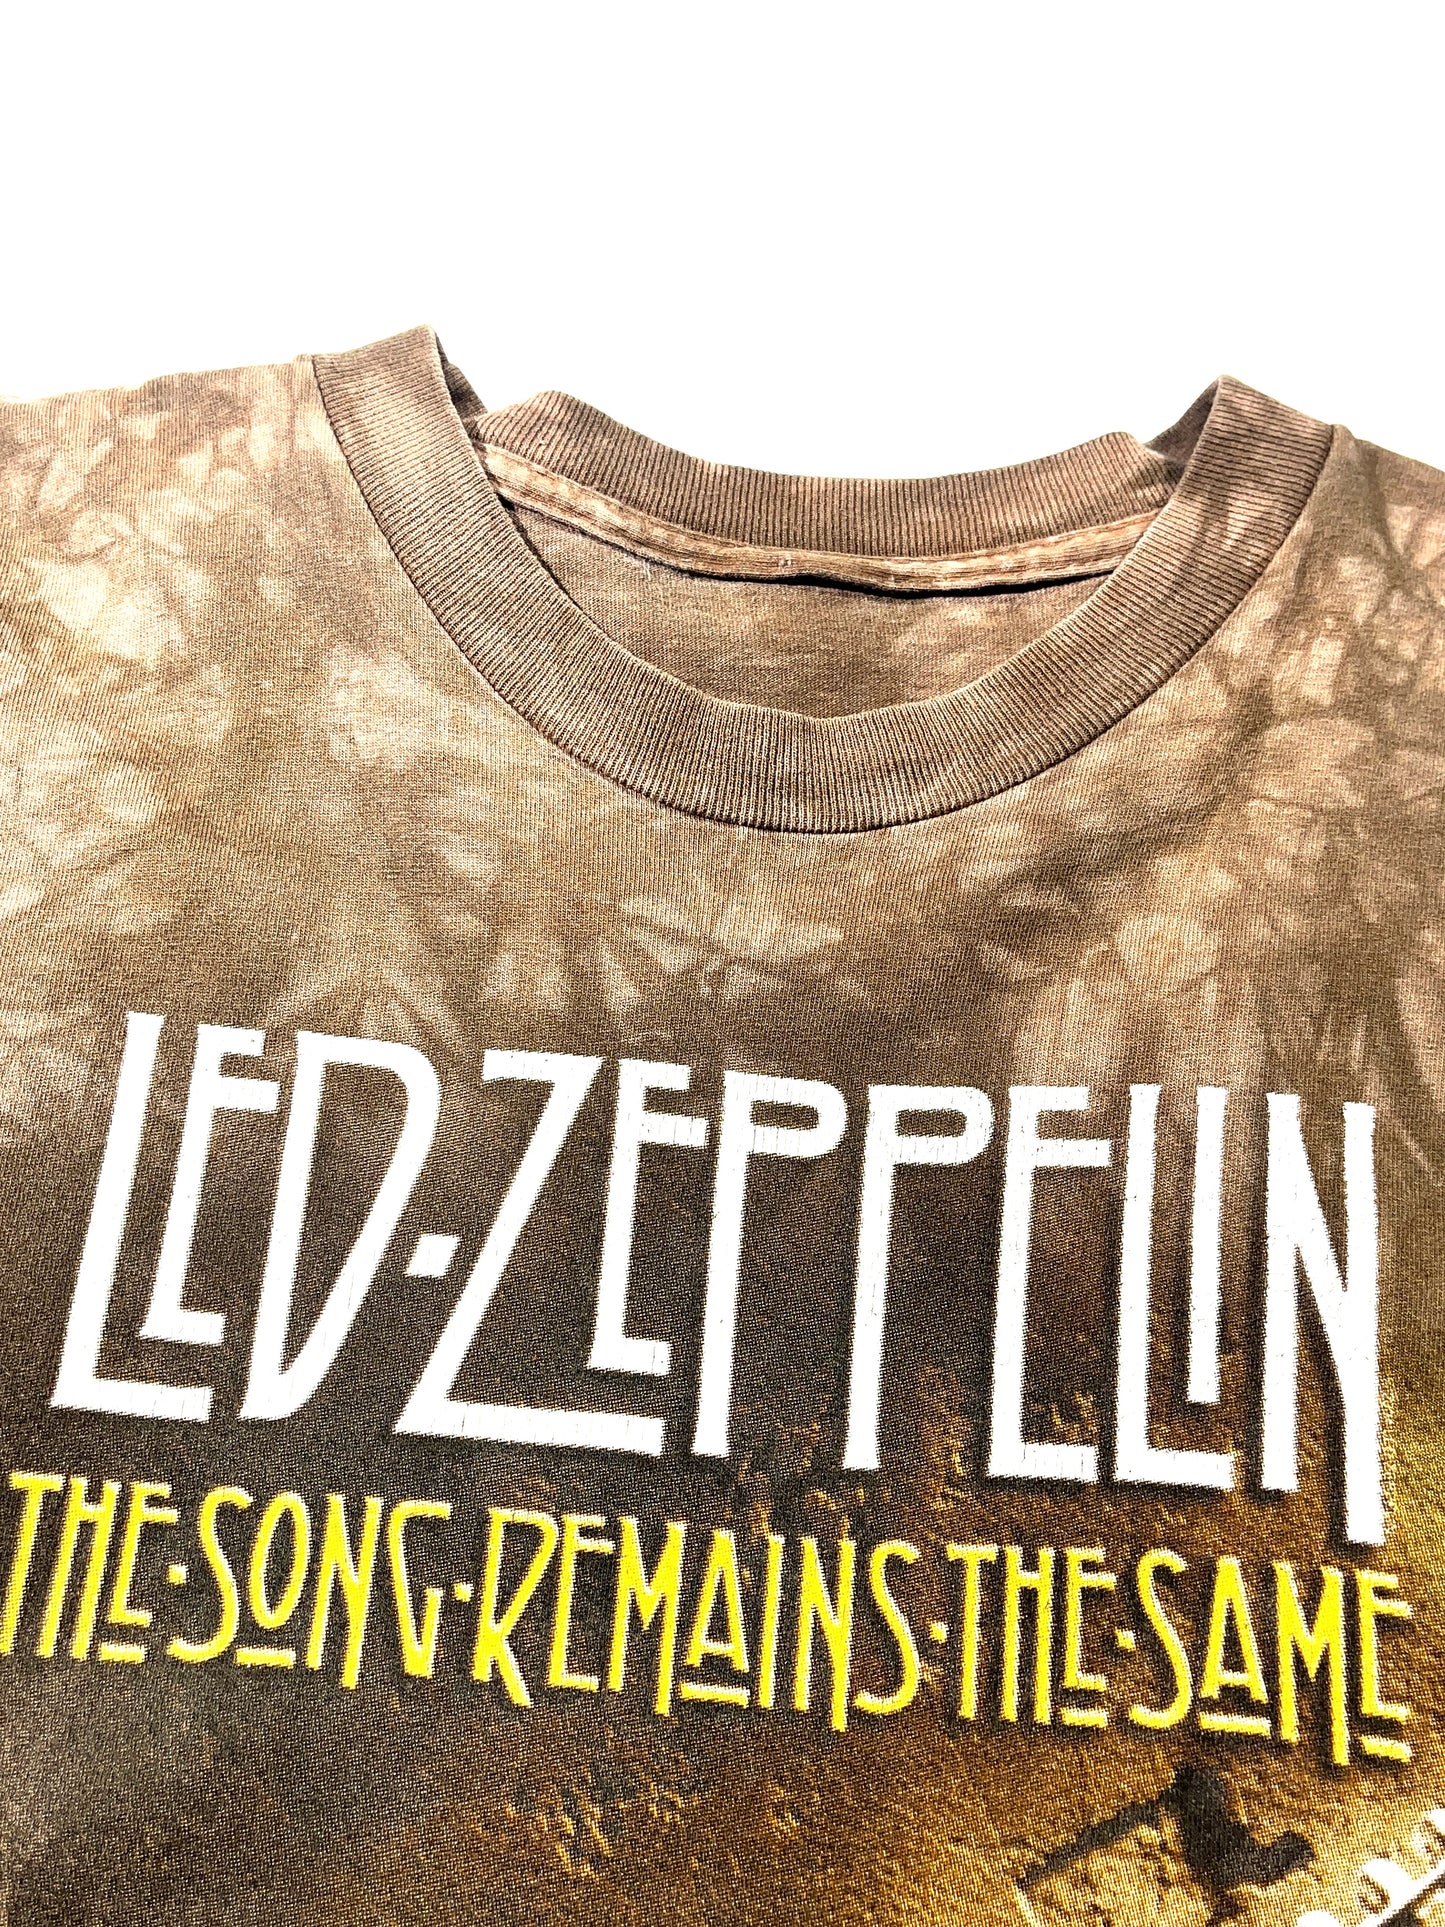 Vintage Led Zeppelin T-Shirt The Song Remains The Same 90's Single Stitch